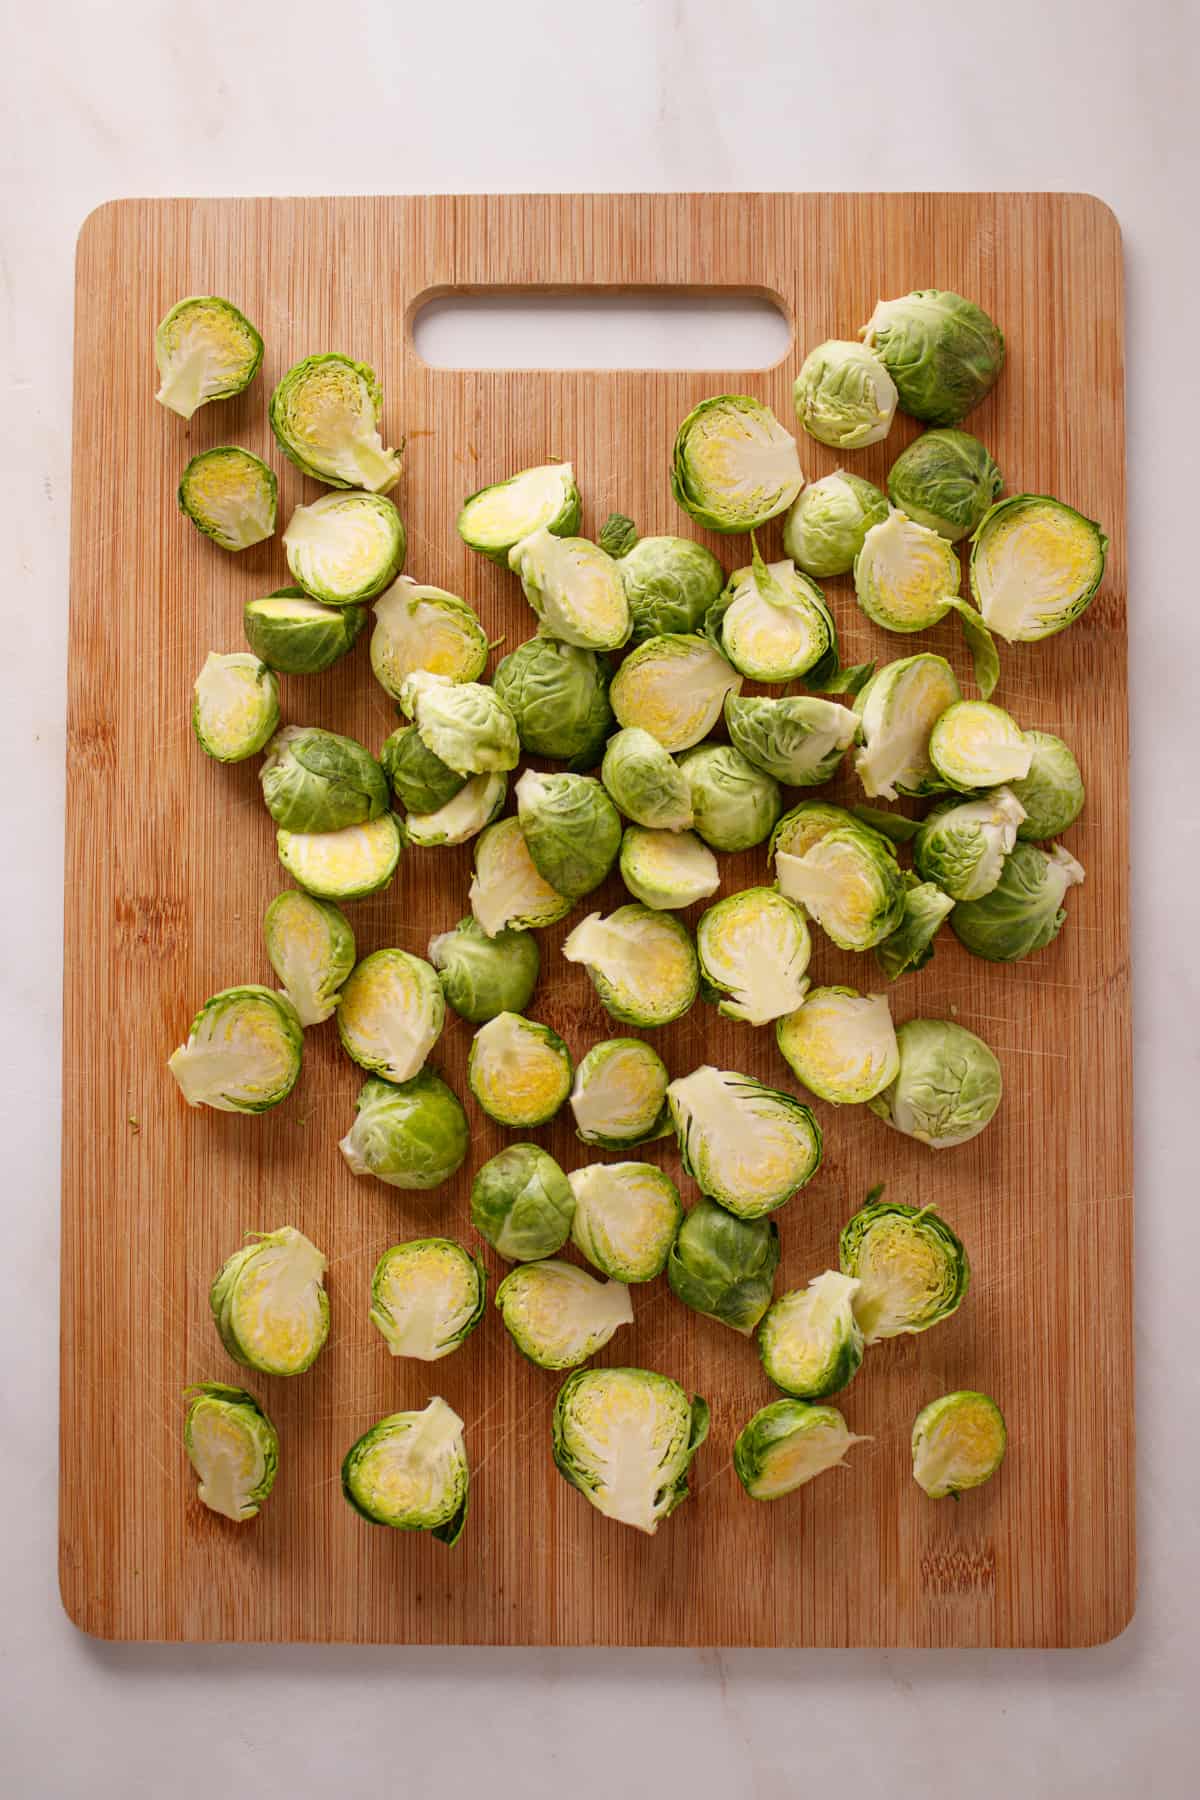 Brussel sprouts sliced in half.